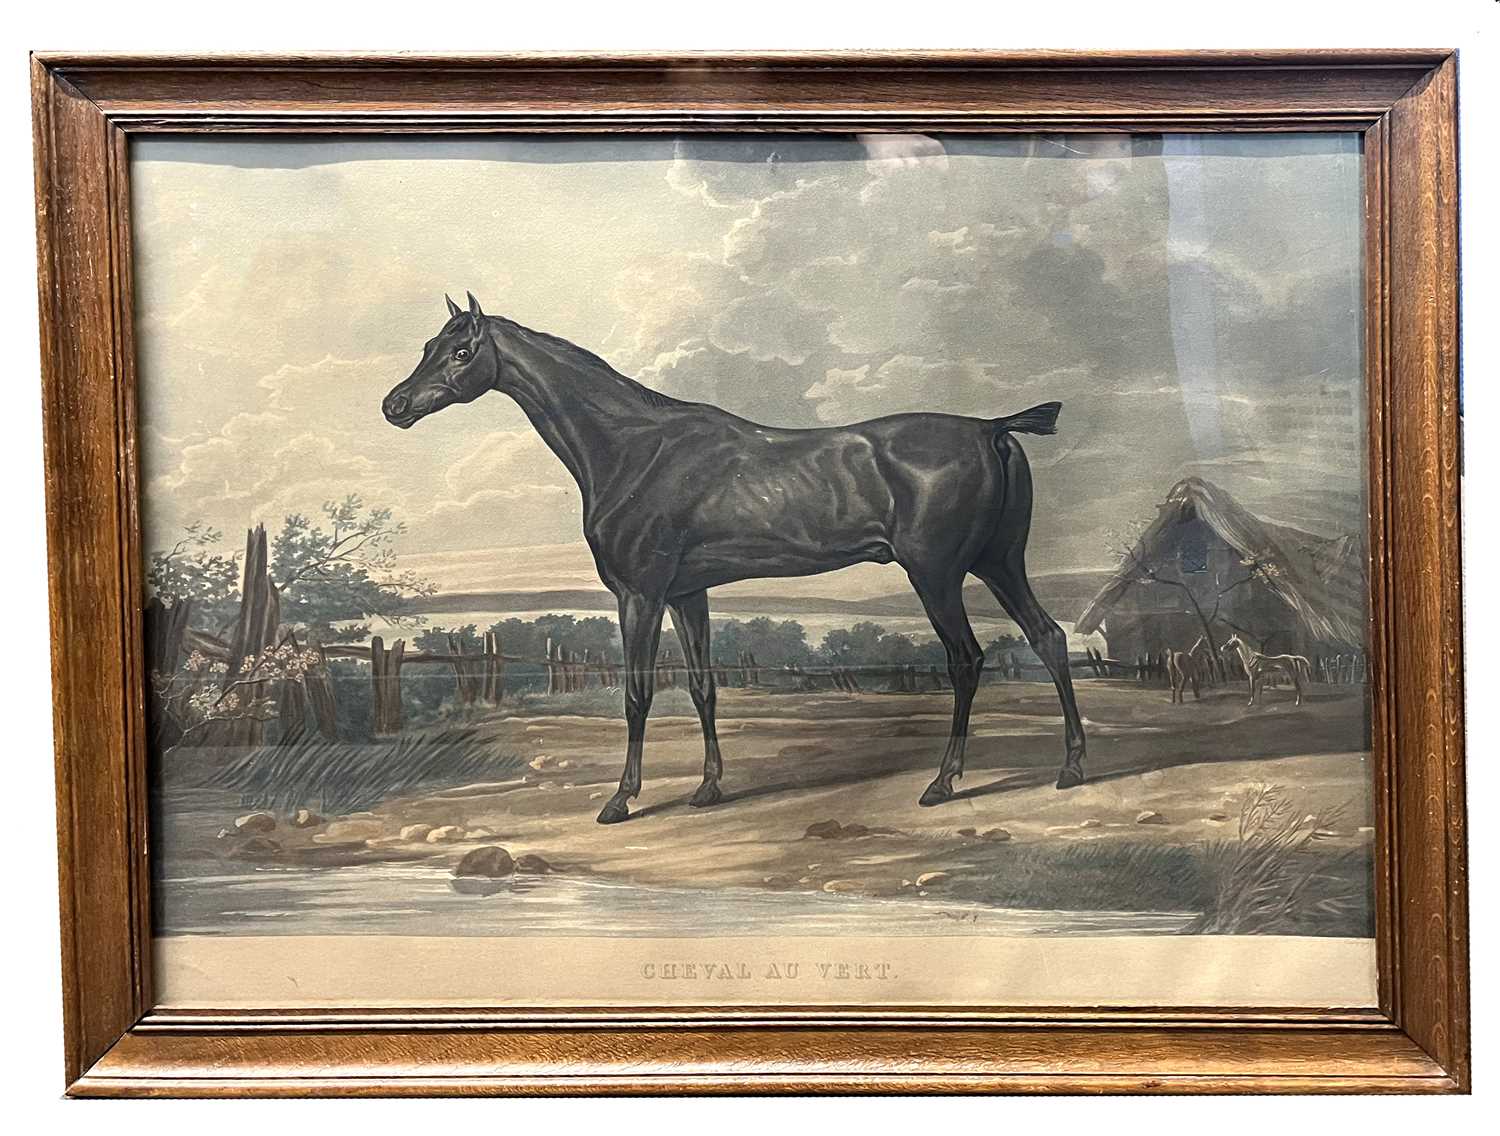 Carle Vernet, French 1758-1836 hand coloured lithograph of a racehorse "Cheval Au Vert" in period